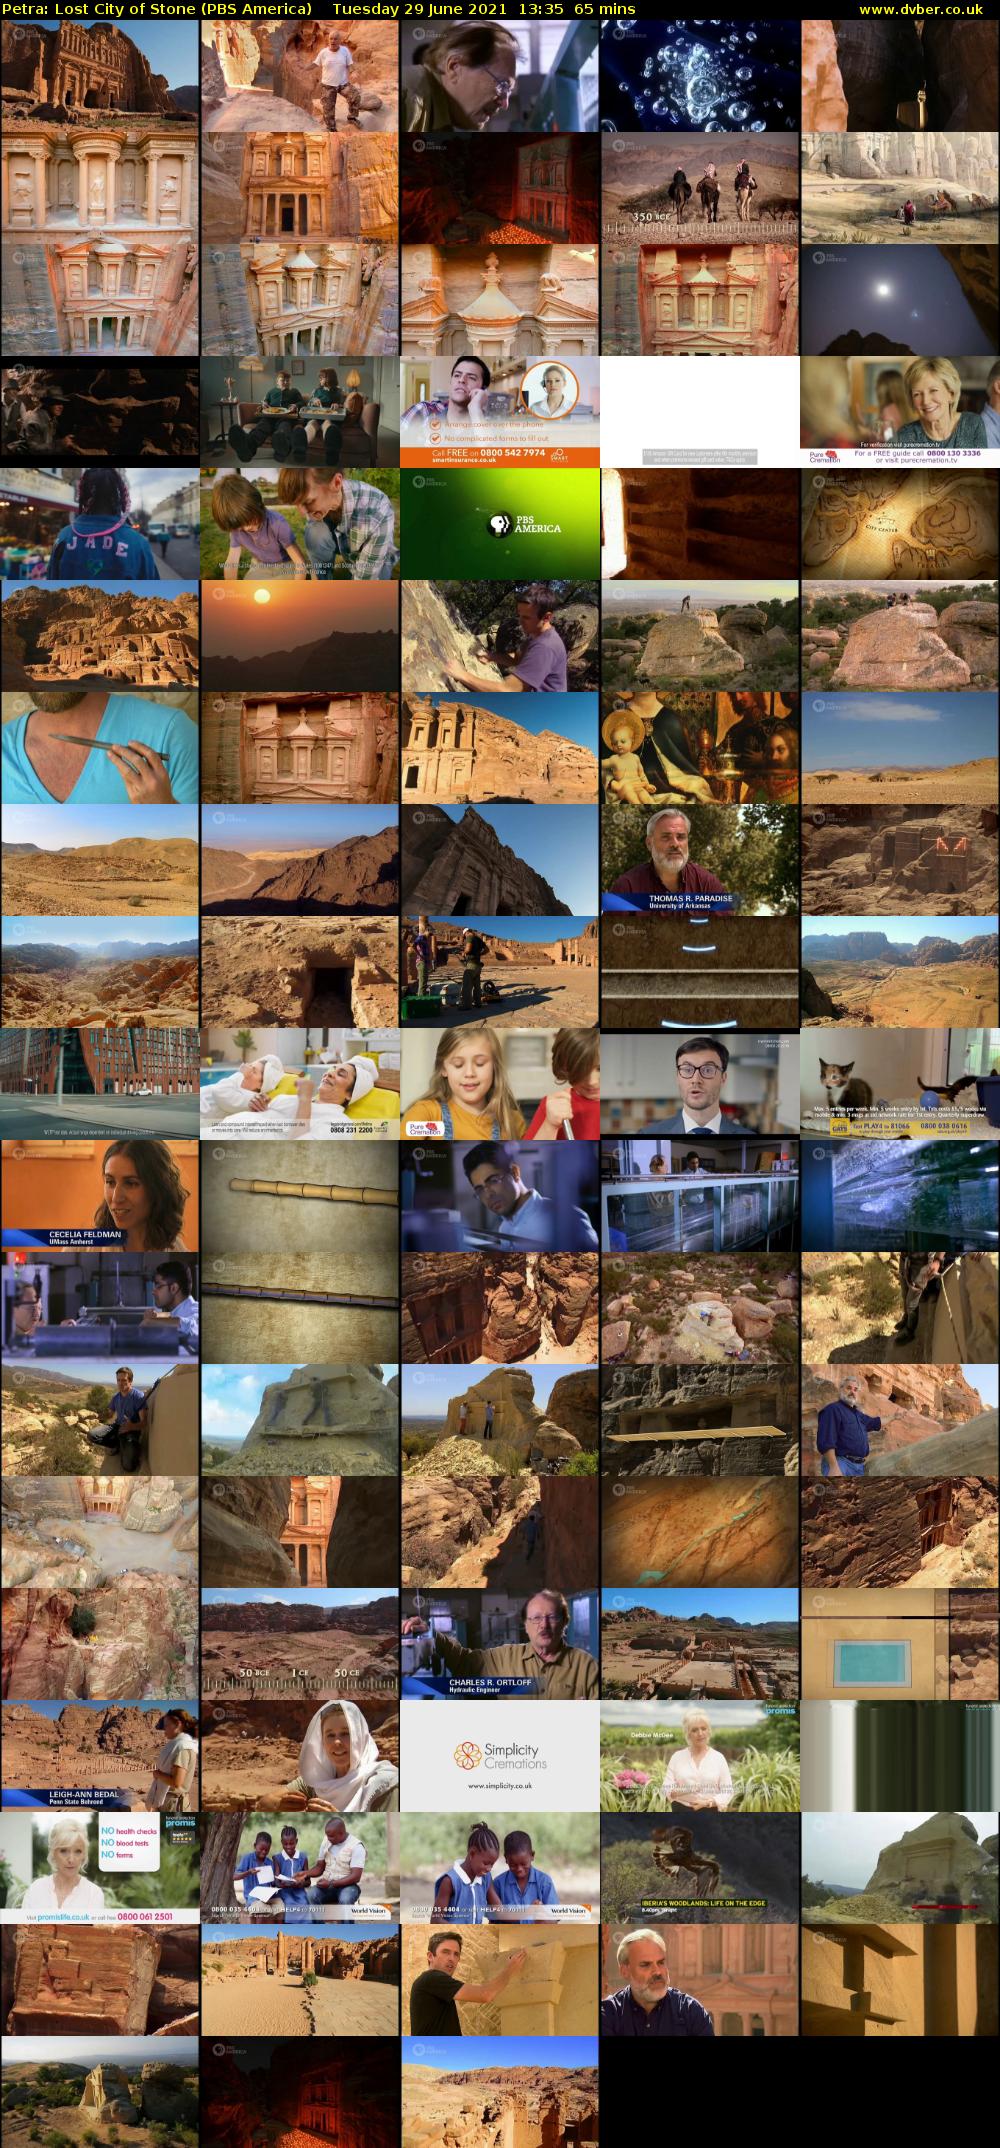 Petra: Lost City of Stone (PBS America) Tuesday 29 June 2021 13:35 - 14:40